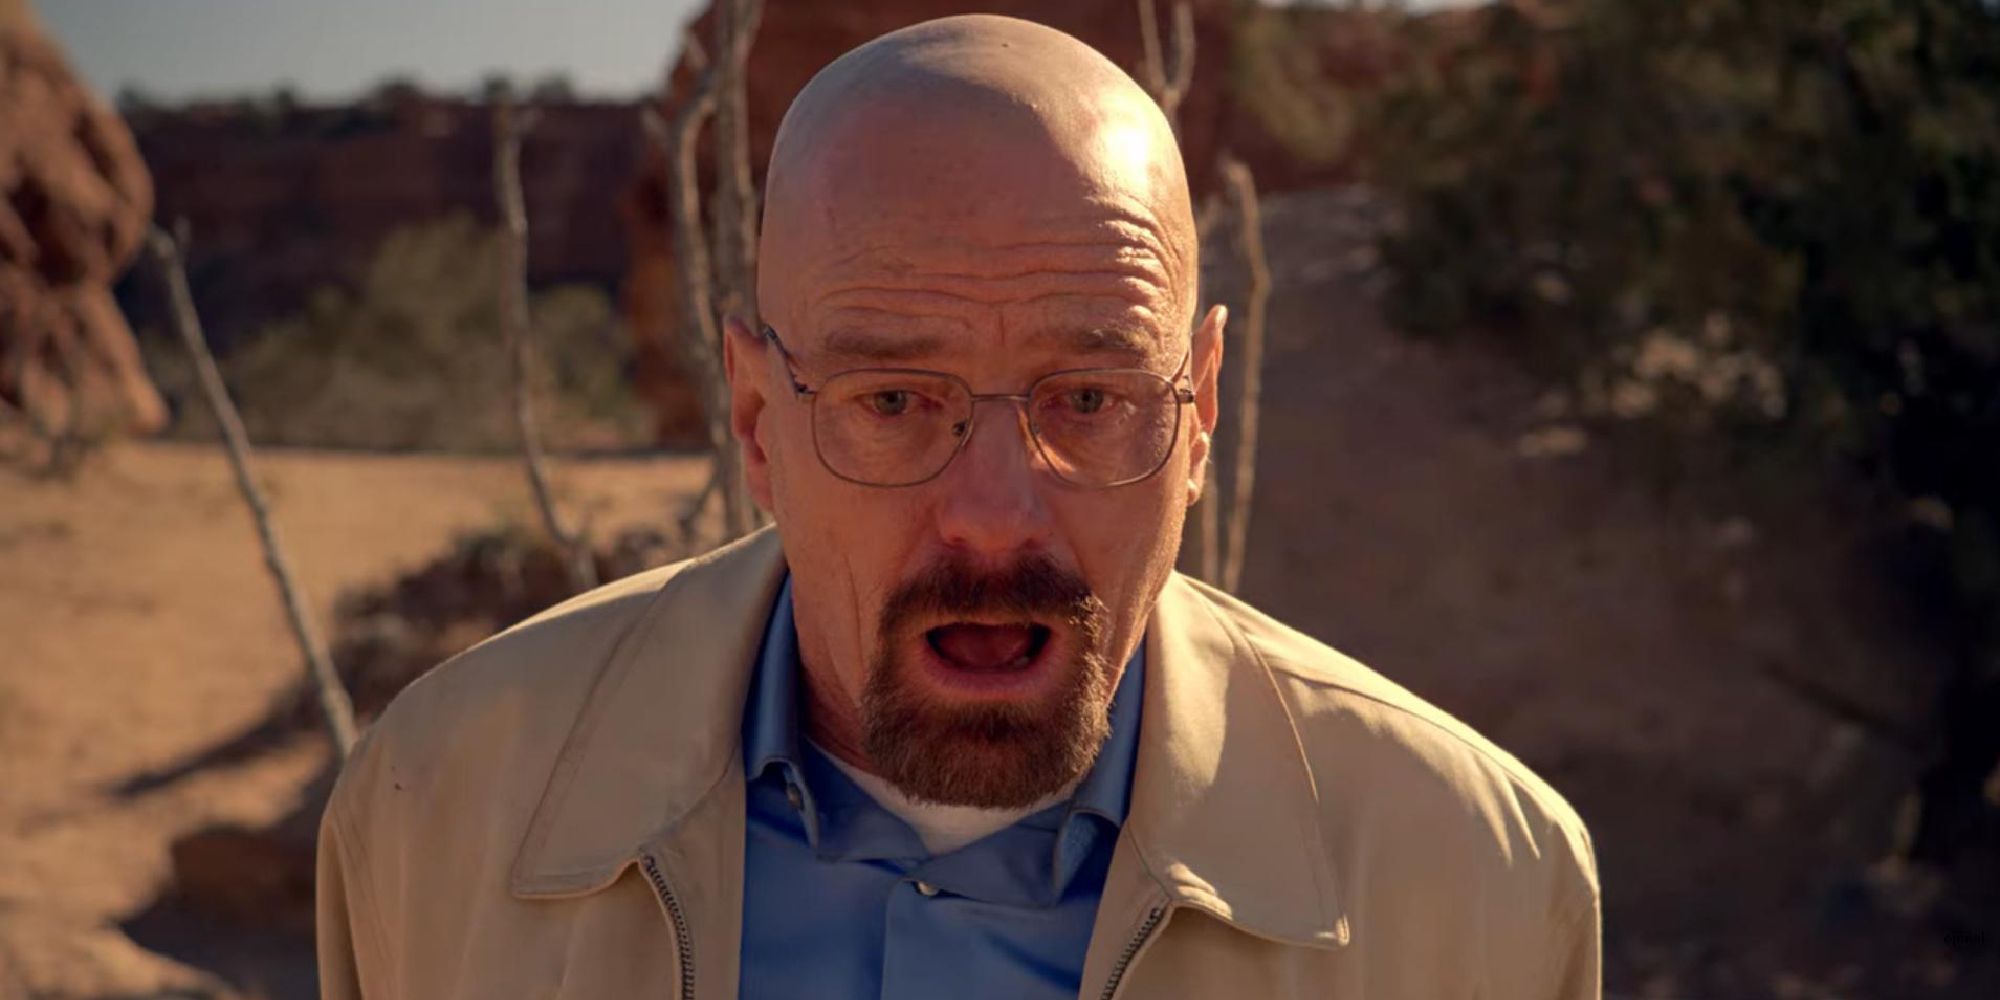 Walter White, mouth agape looking shocked in a scene from Ozymandias, Breaking Bad.